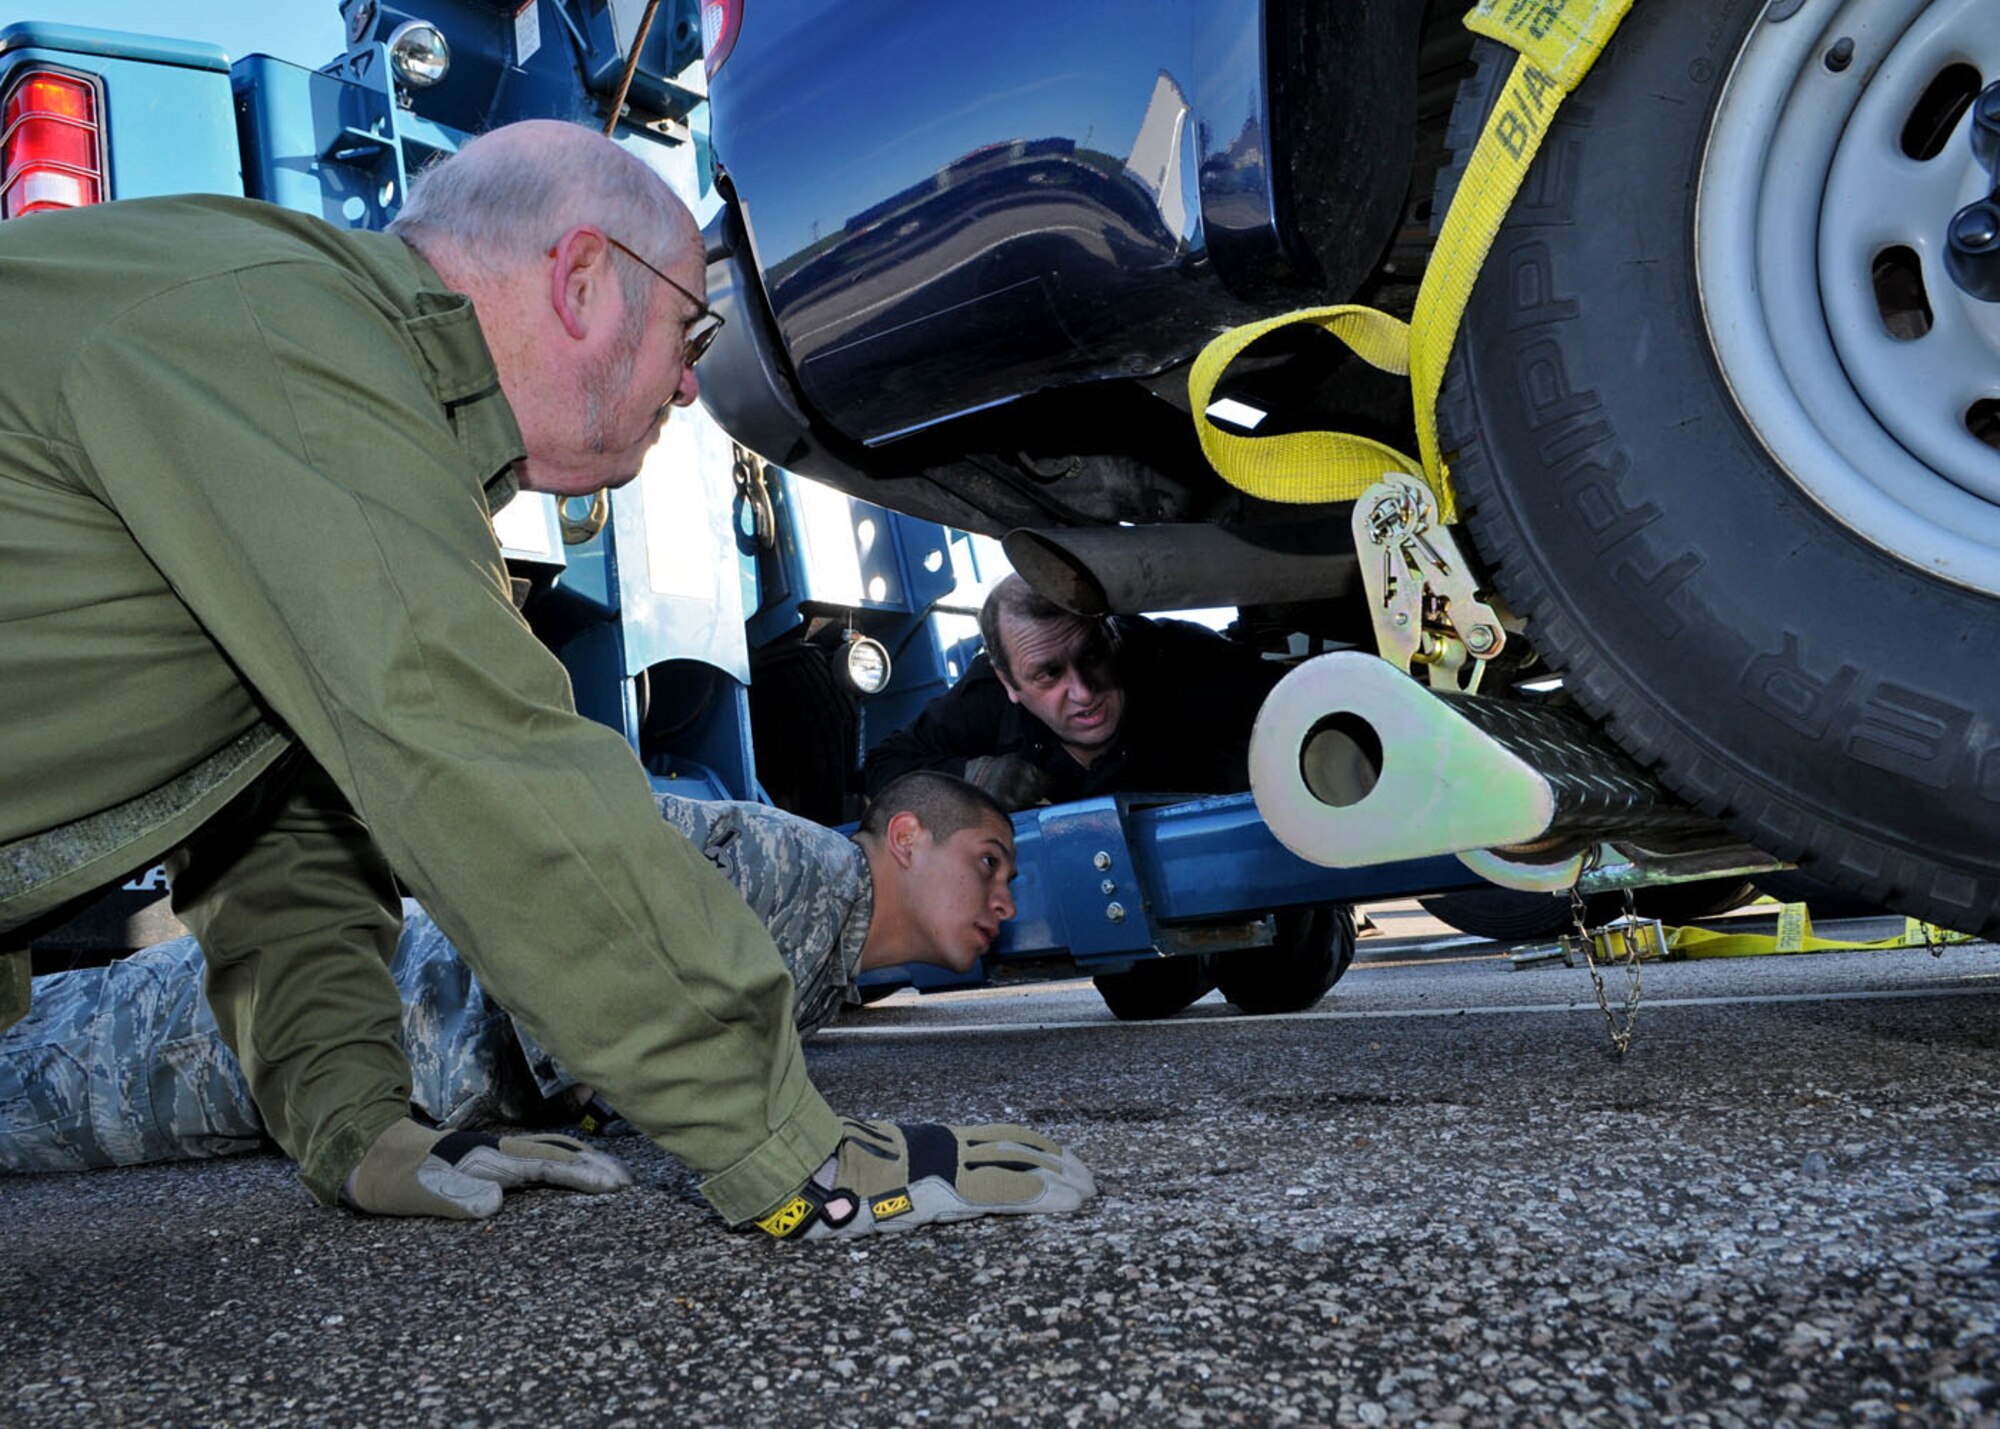 Mr. John Lake (left) and Airman Jonathan Loera (center) both 100th Logistics Readiness Squadron vehicle operators, watch as Dave Green (right), the training manager for the vehicle operations section, explains proper placement of the tow vehicle prior to lifting a truck during wrecker training Oct. 27, 2008. The training was held to certify and give hands on experience to vehicle operators for proper use and basic knowledge of using the Wrecker vehicles. (U.S. Air Force photo by Staff Sgt. Jerry Fleshman) 